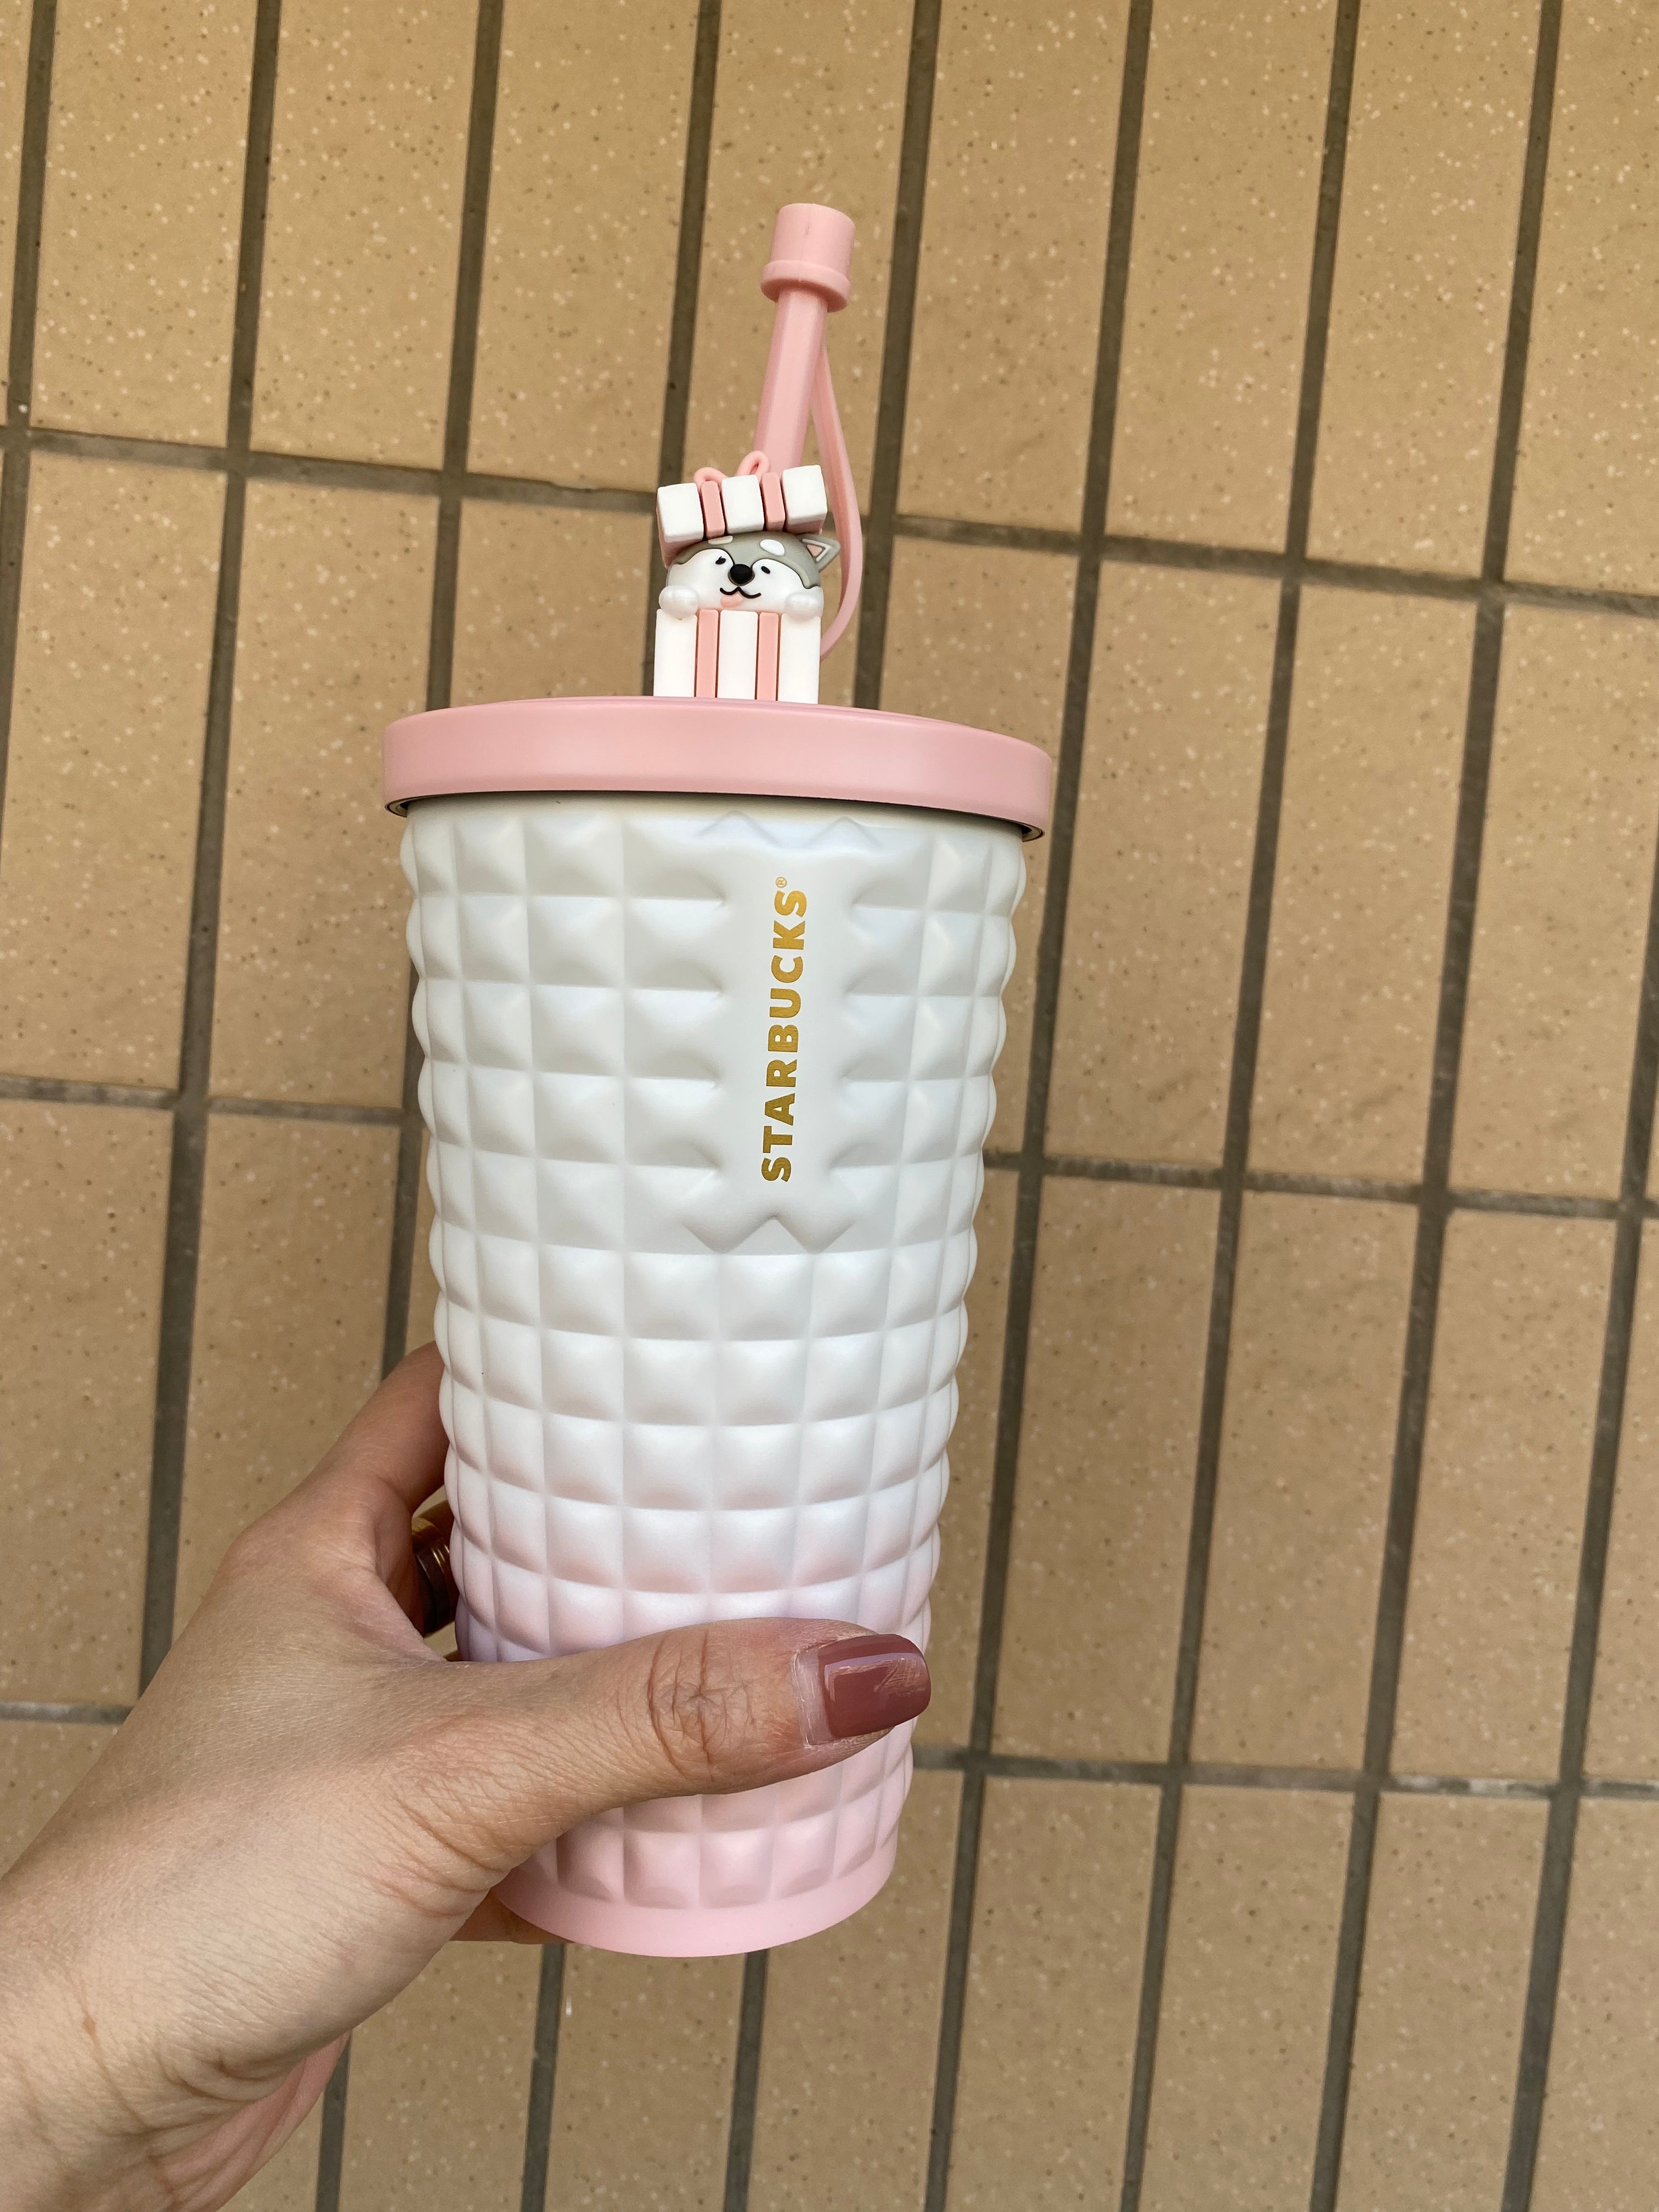 Starbucks China Pink Pineapple Stainless steel straw cup 16oz